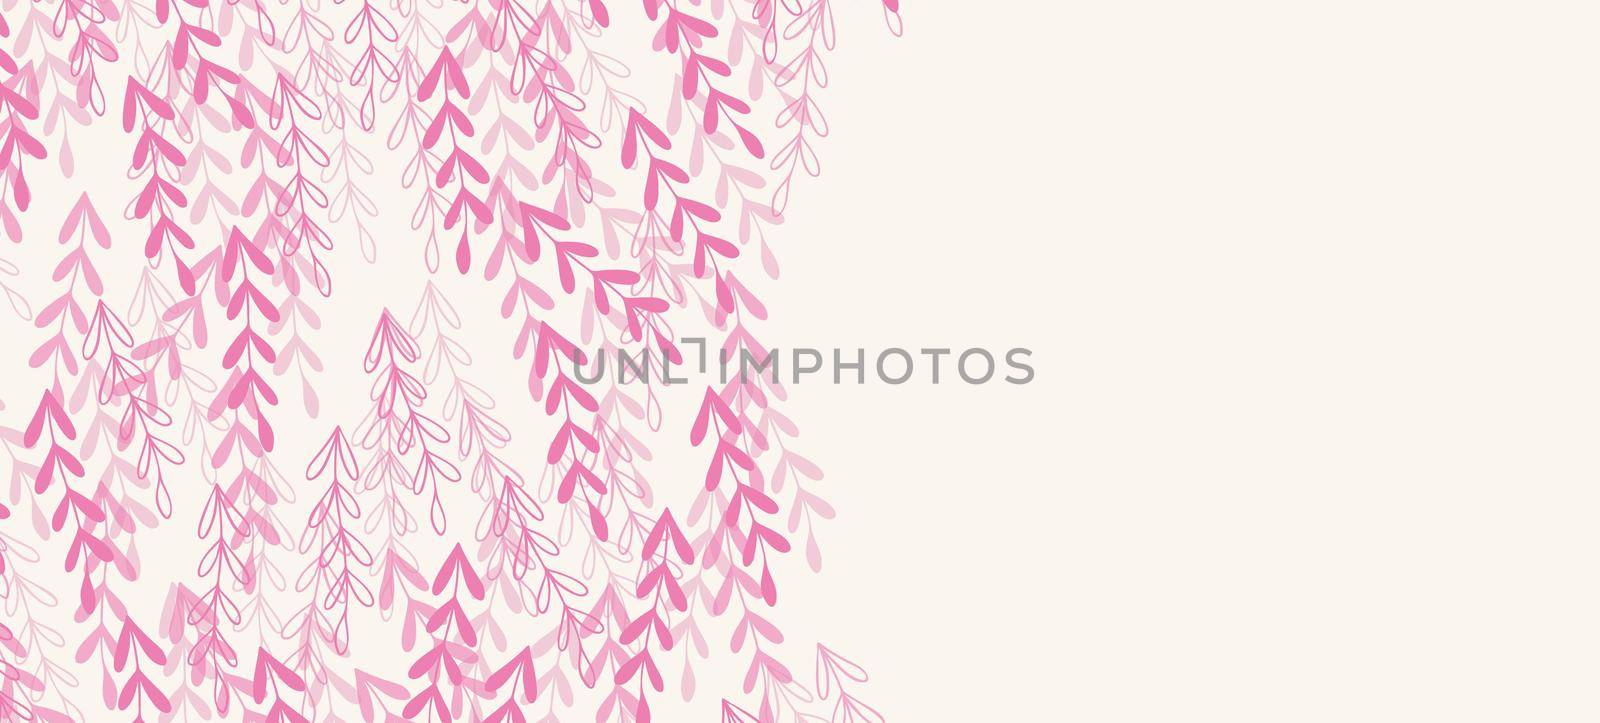 Floral web banner with drawn pink exotic leaves. Nature concept design. Modern floral compositions with summer branches. Vector illustration on the theme of ecology, natura, environment.